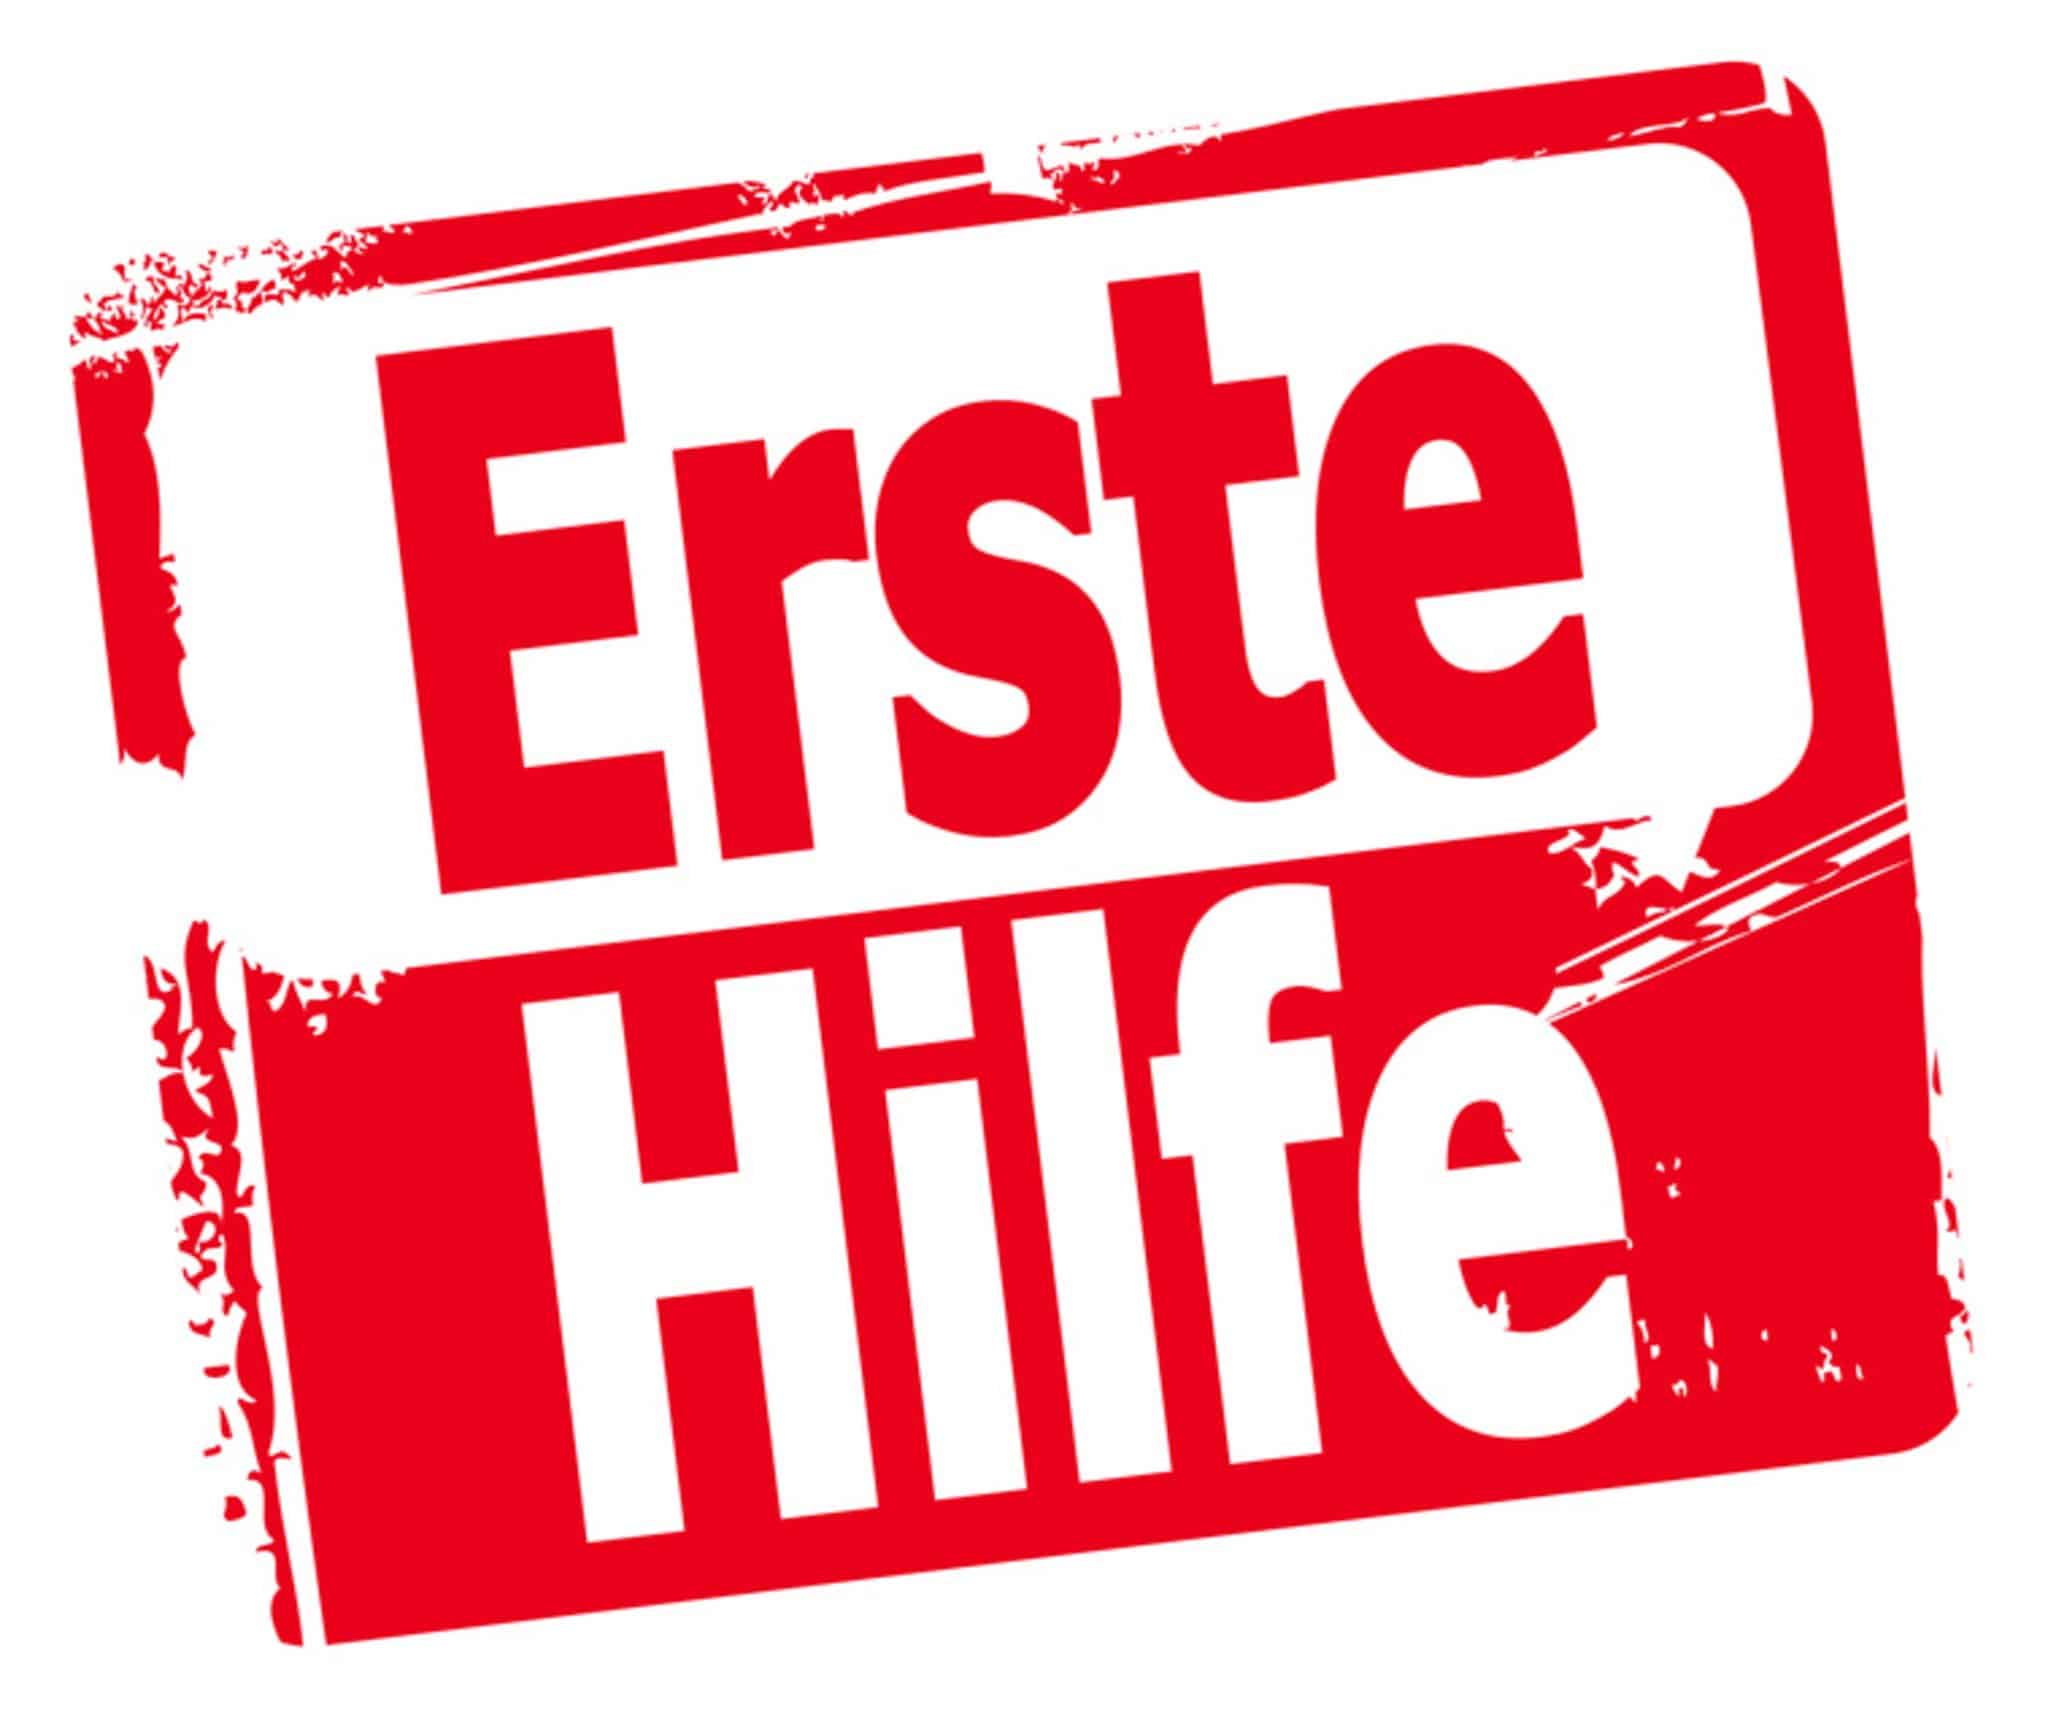 You are currently viewing Erste Hilfe Kurs